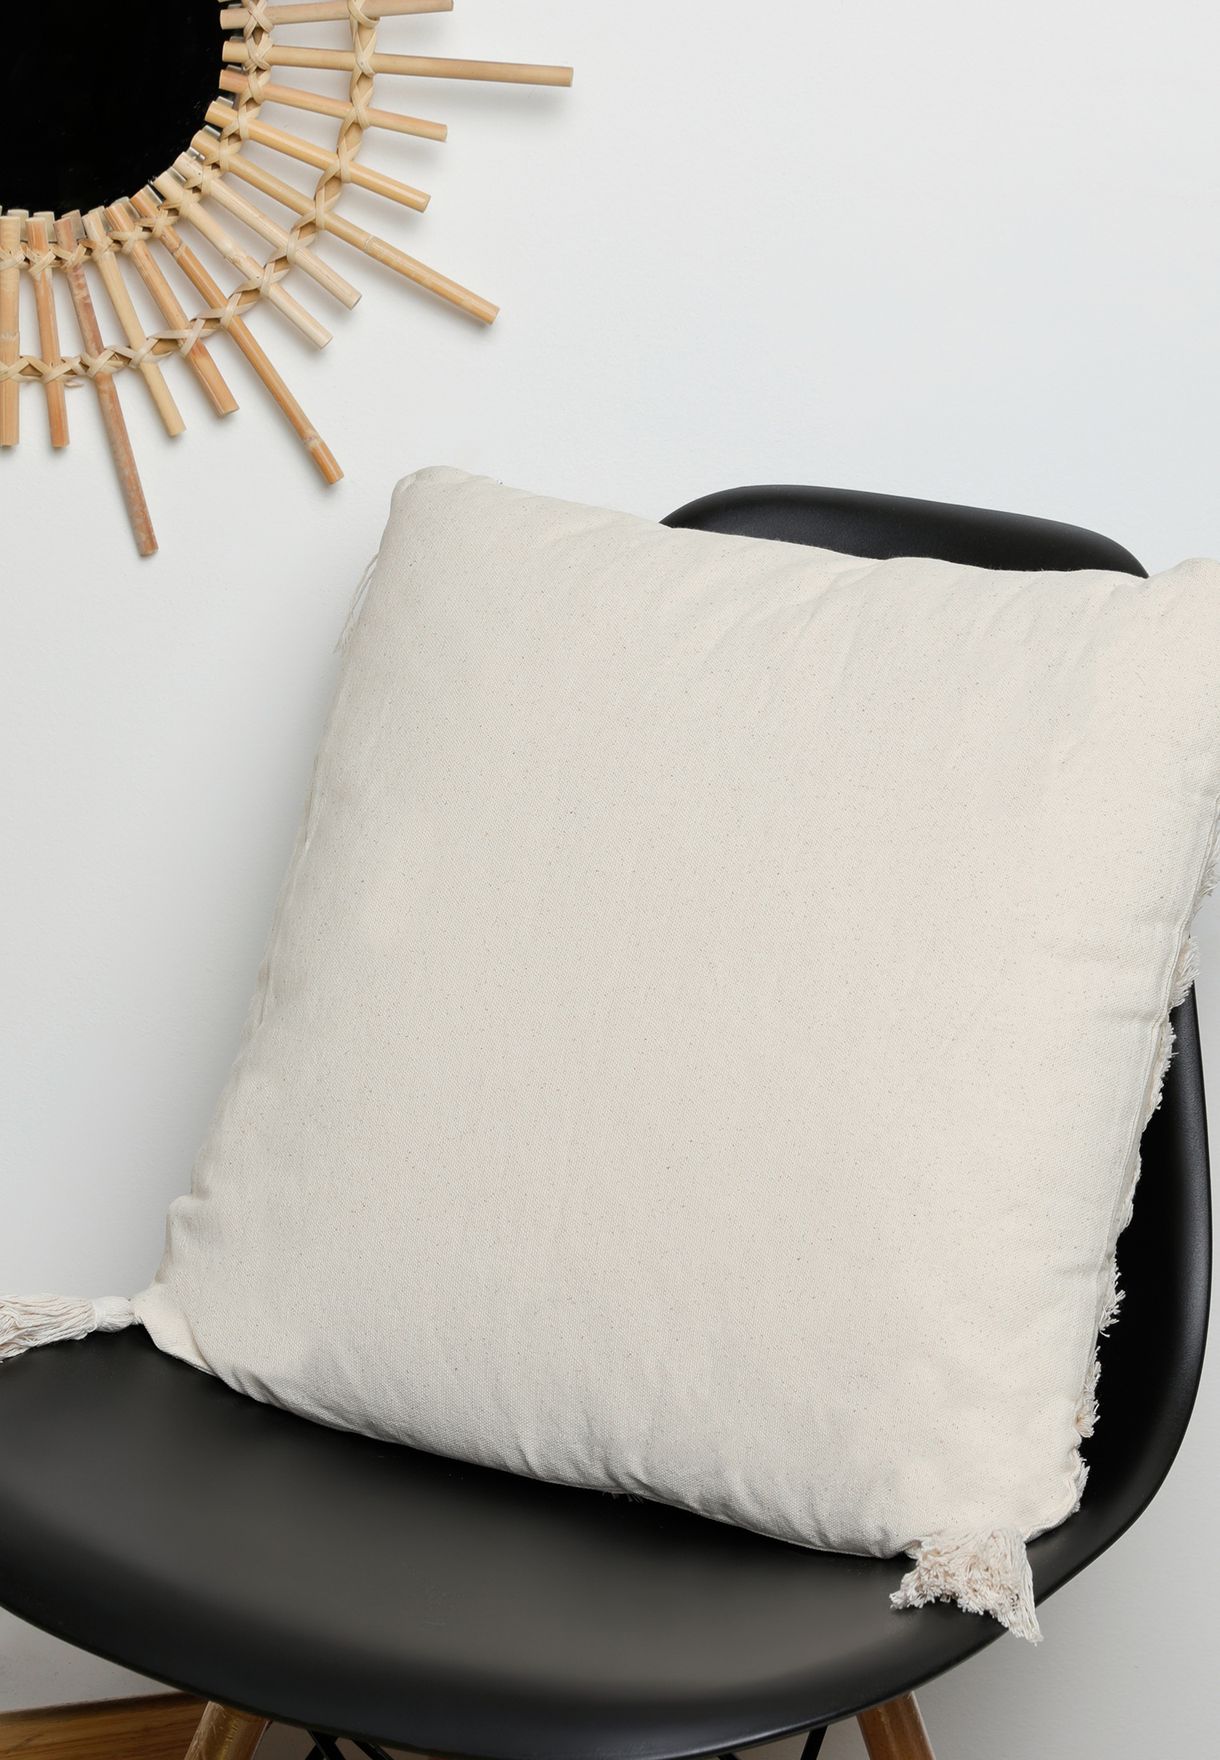 Patterned Cushion With Insert